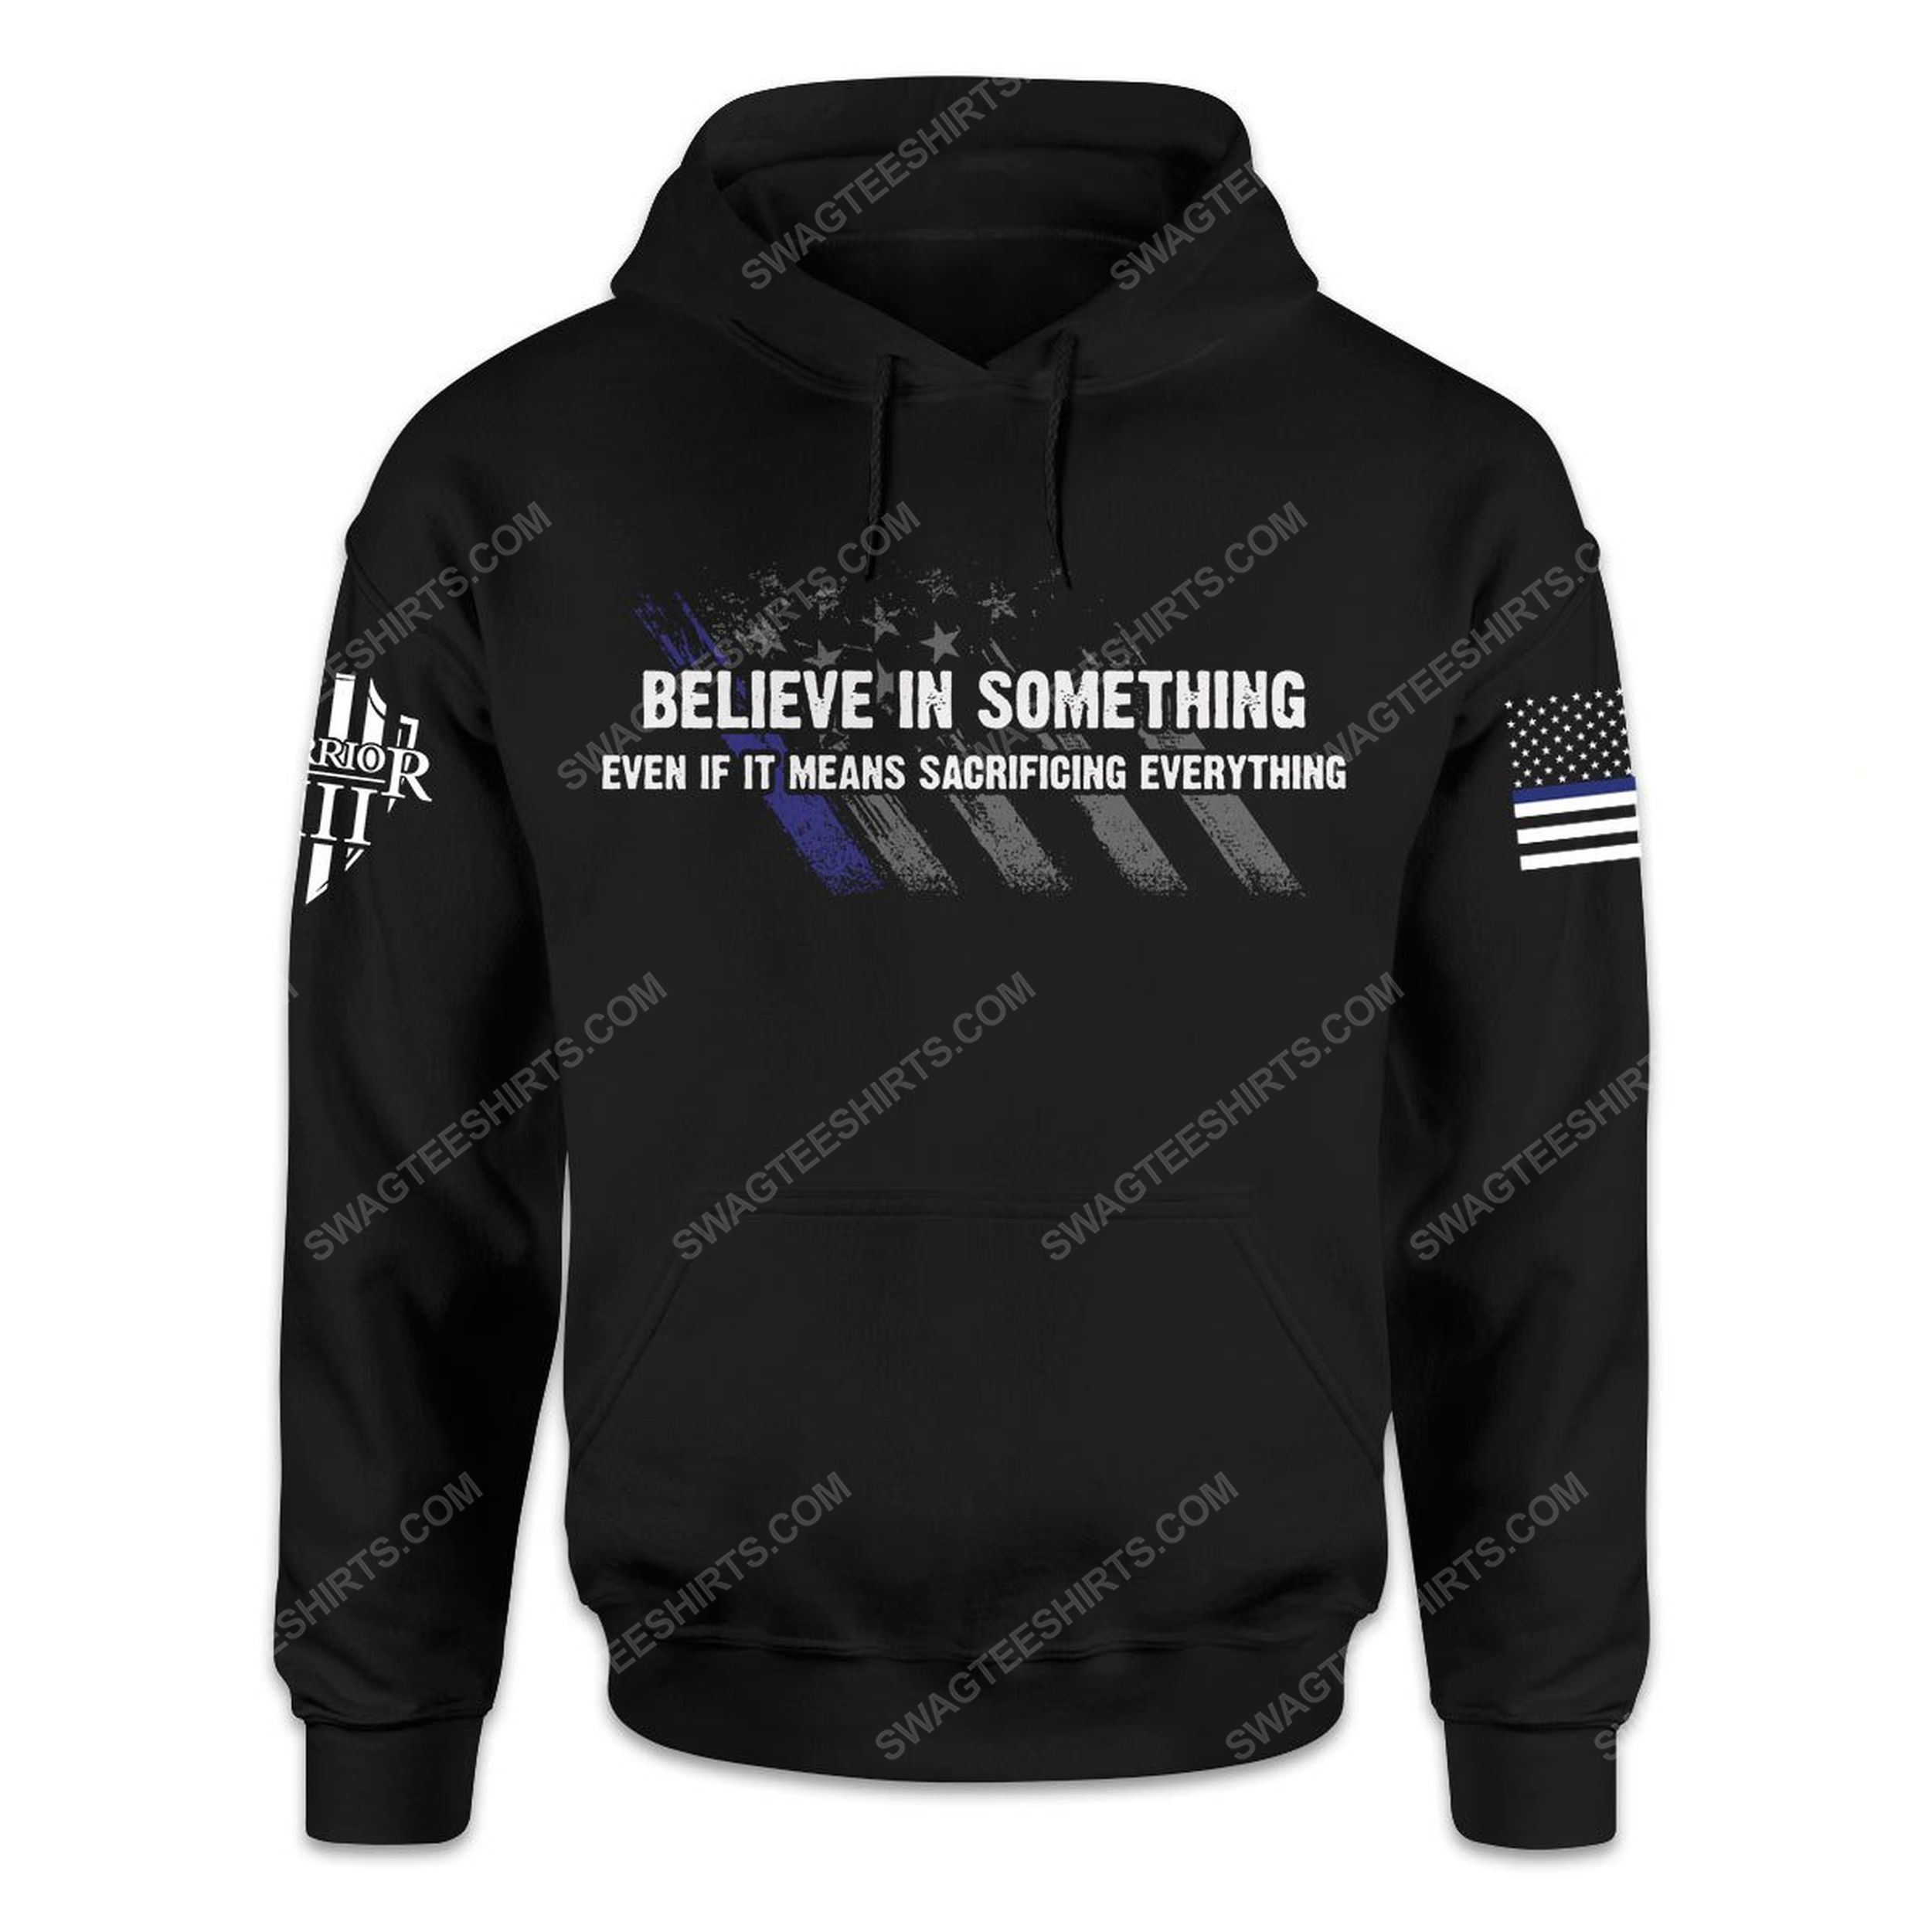 Believe in something even if it means sacrificing everything shirt 2(1)